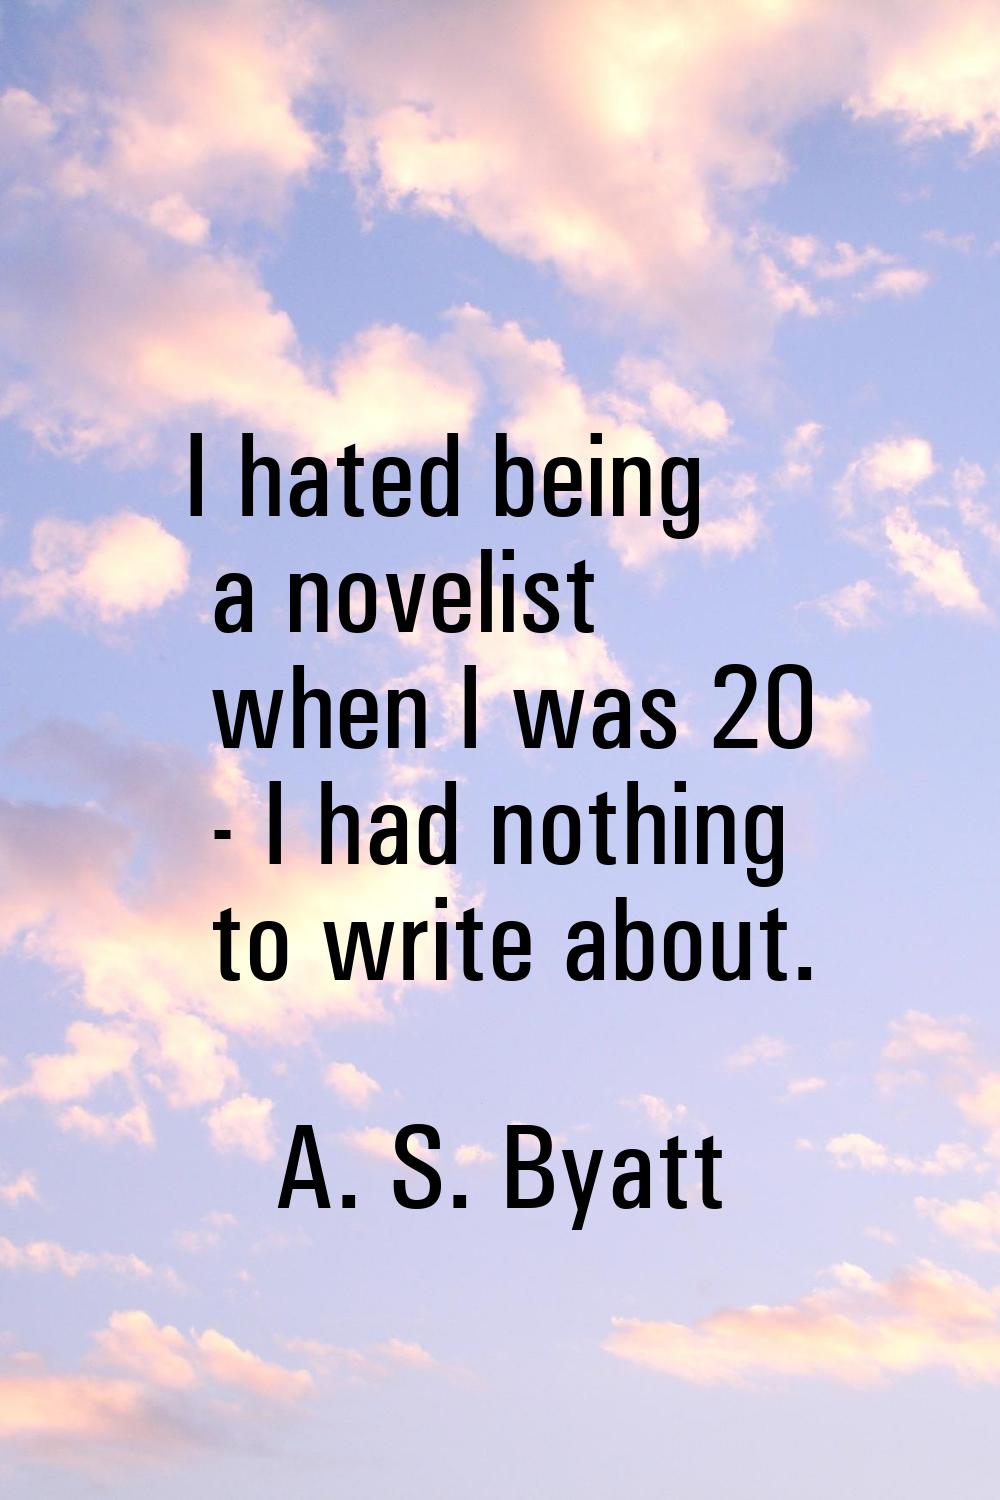 I hated being a novelist when I was 20 - I had nothing to write about.